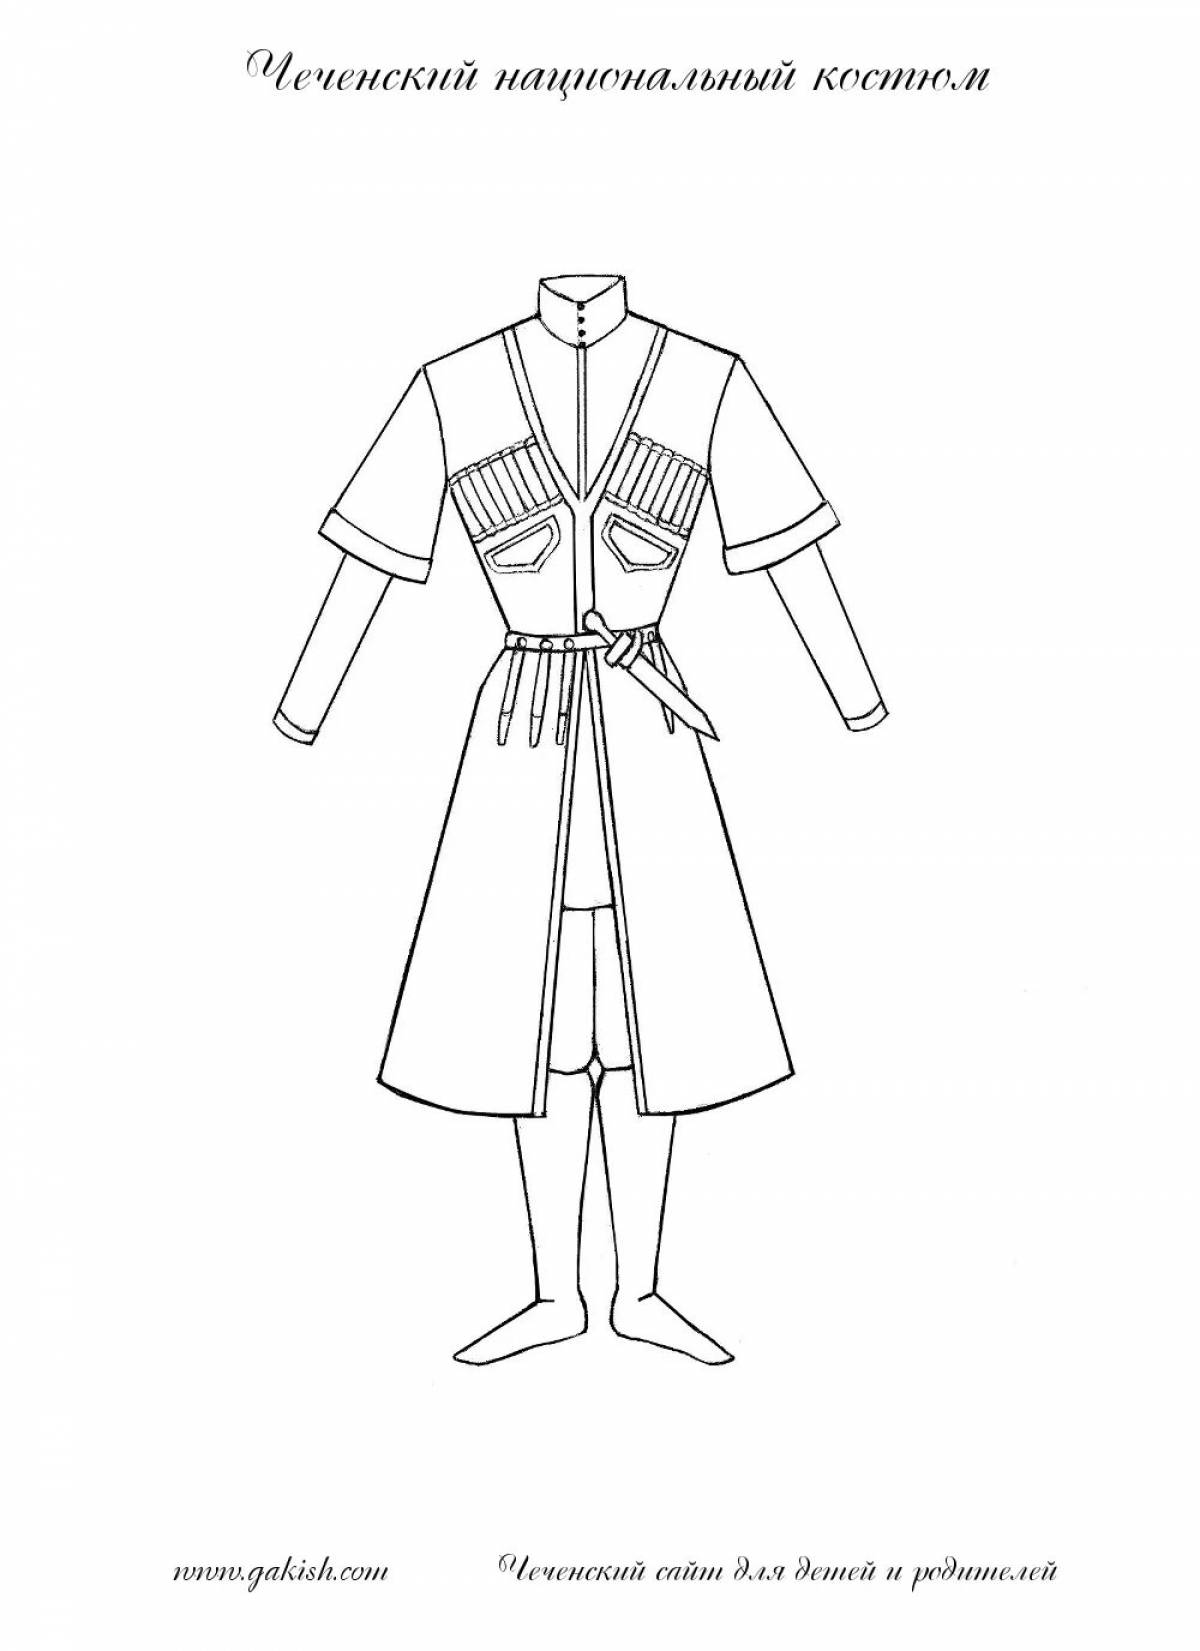 Coloring page of the radiant Cossack costume